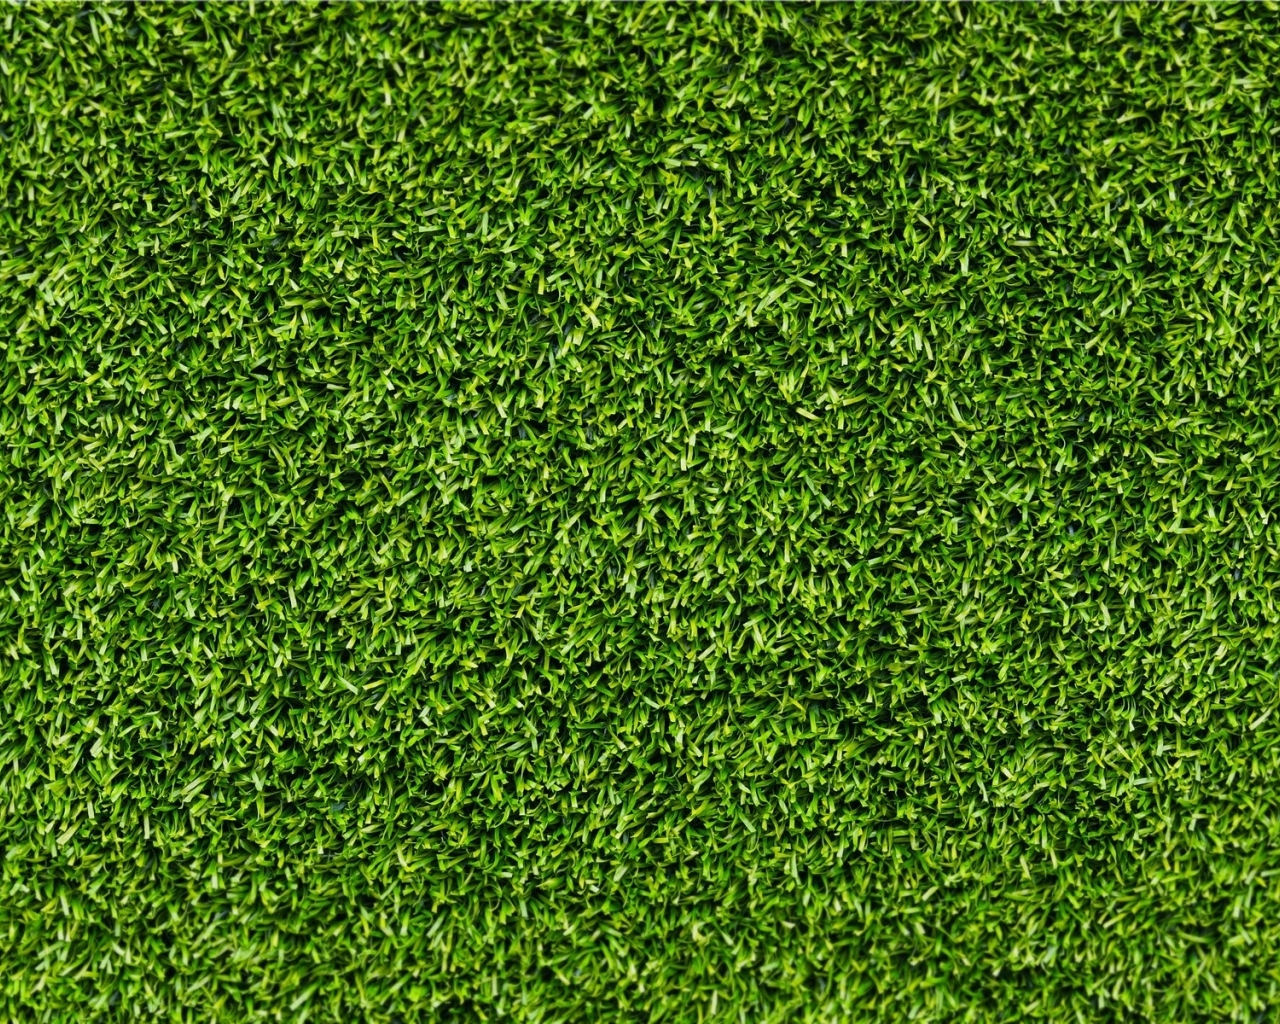 Green Grass Texture Wallpaper In Textures With All